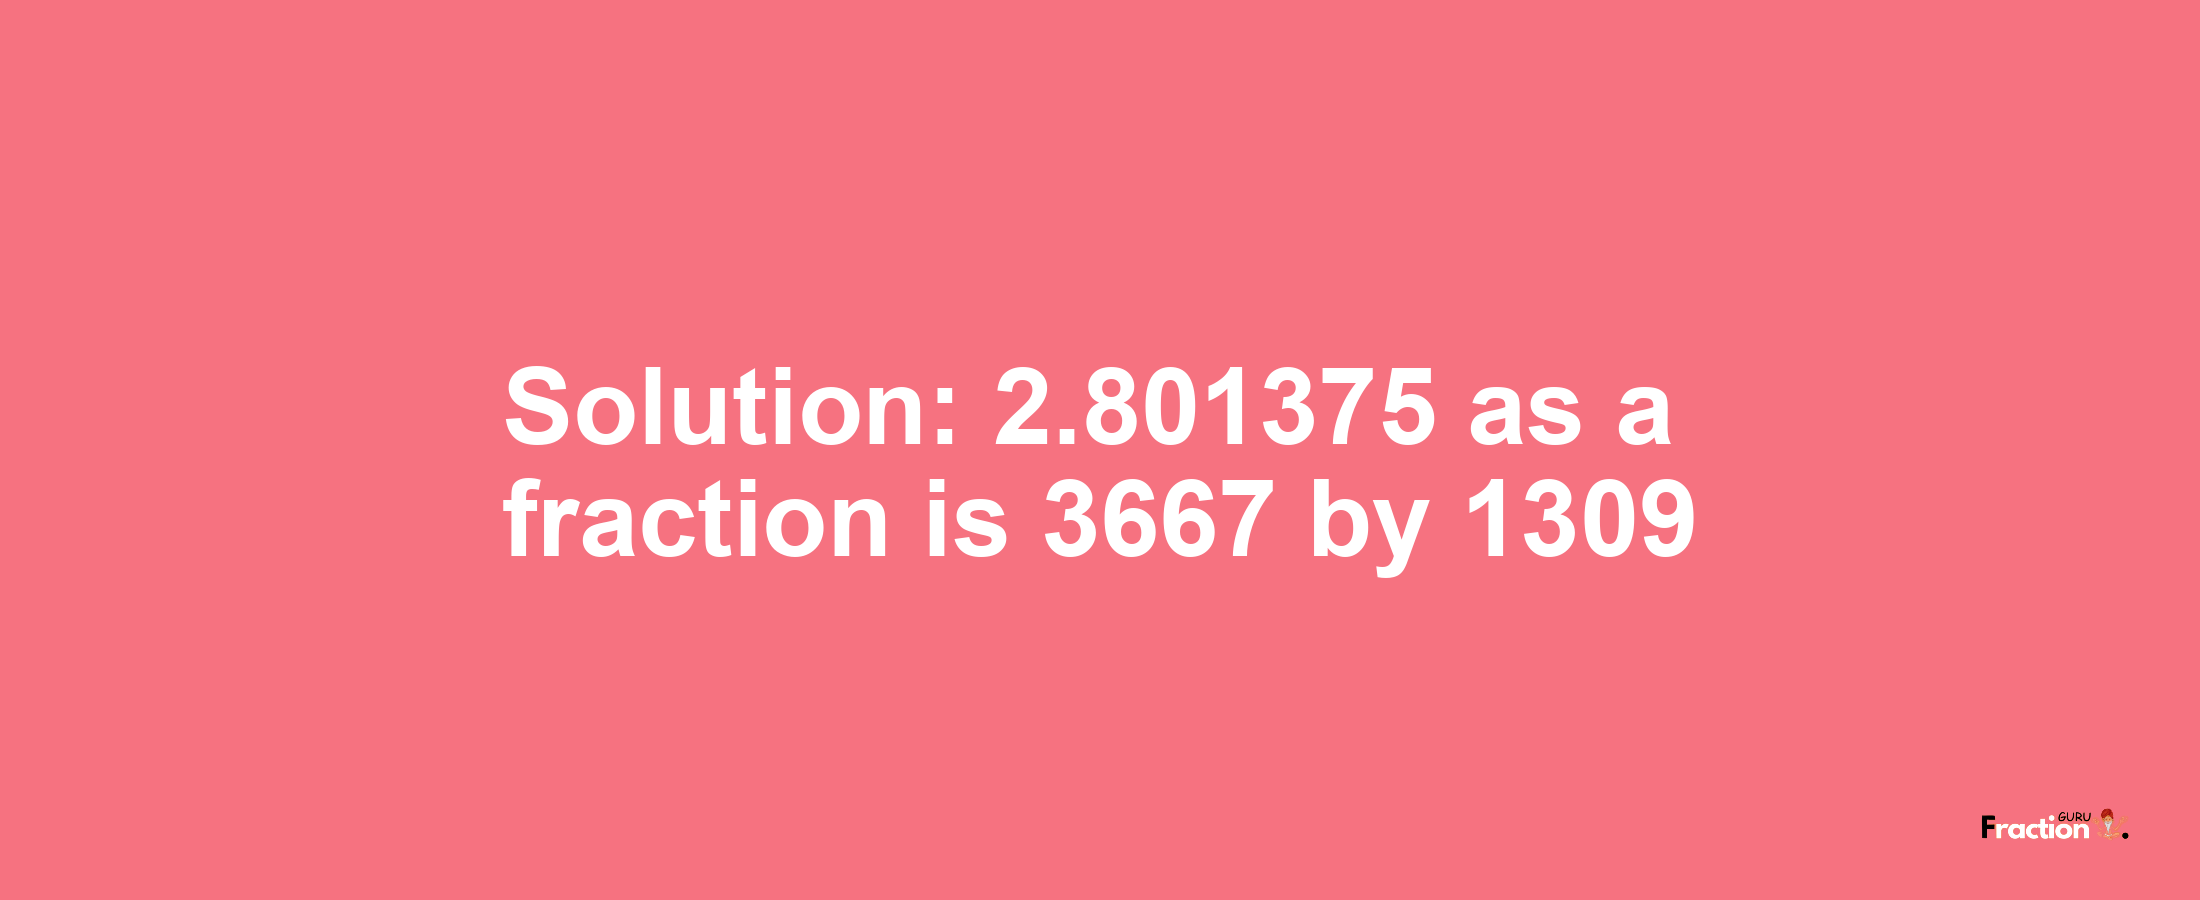 Solution:2.801375 as a fraction is 3667/1309